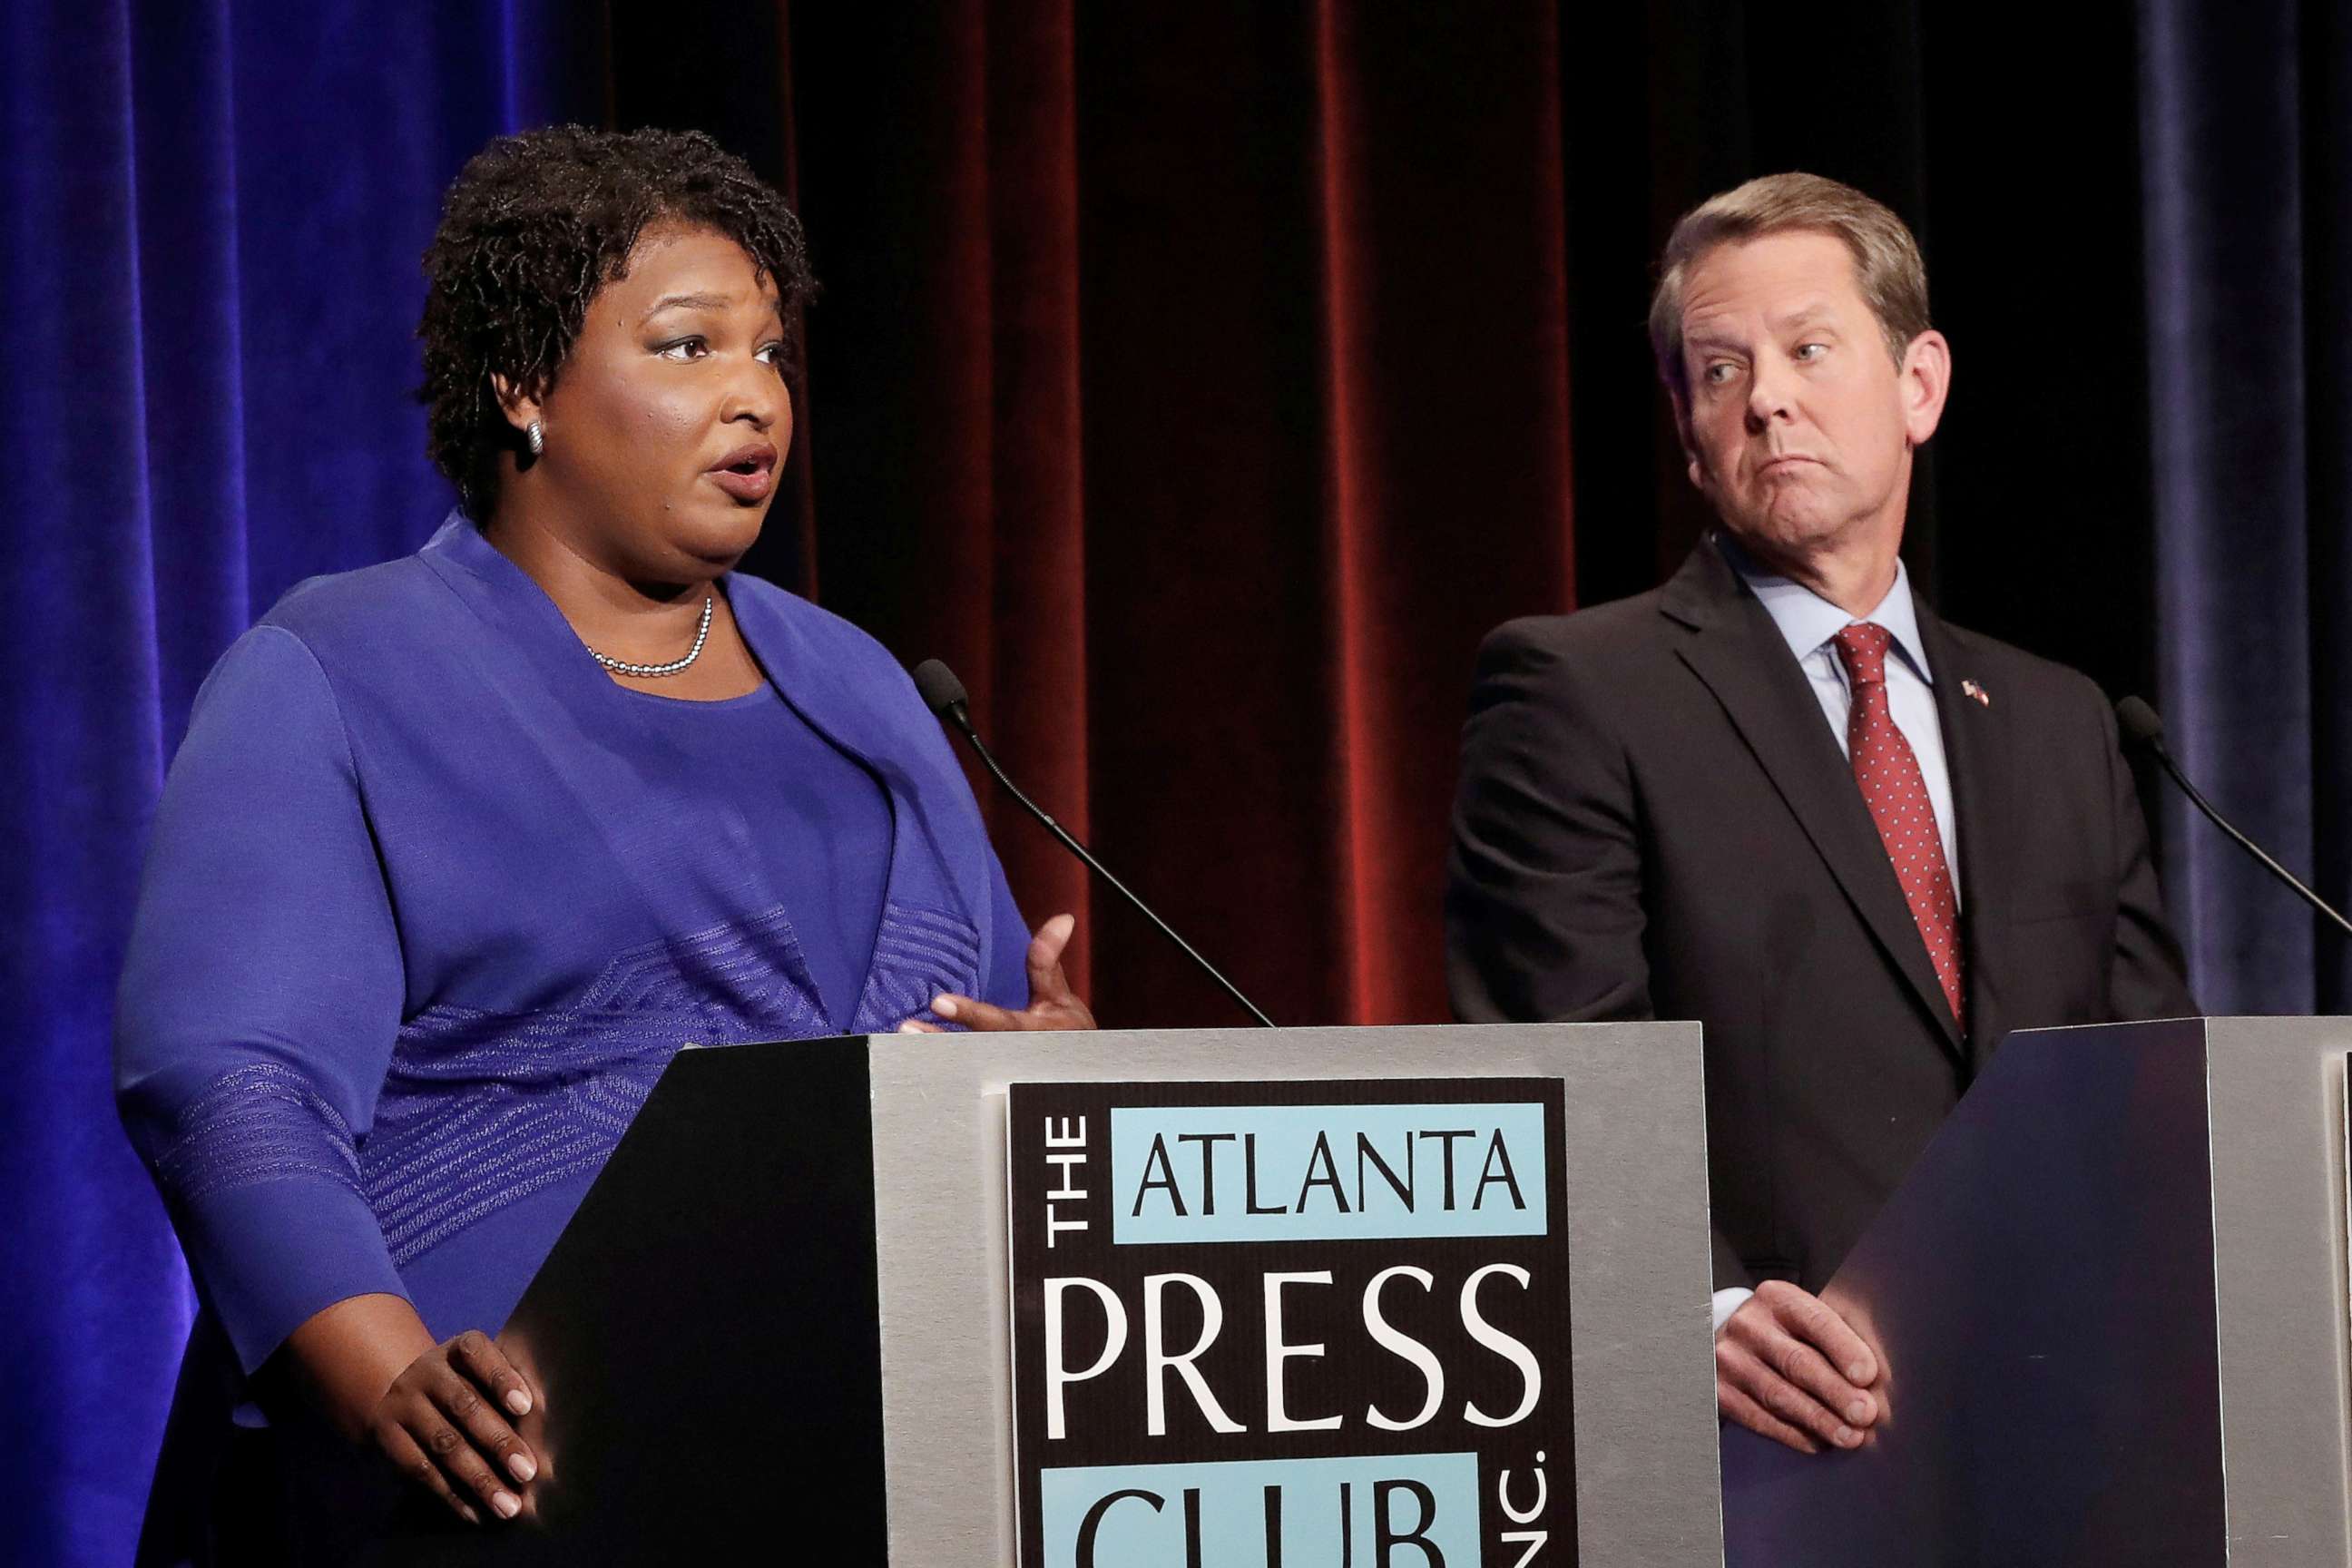 PHOTO: Democratic gubernatorial candidate for Georgia Stacey Abrams speaks, as Republican candidate Brian Kemp looks on, during a debate in Atlanta, Oct. 23, 2018.